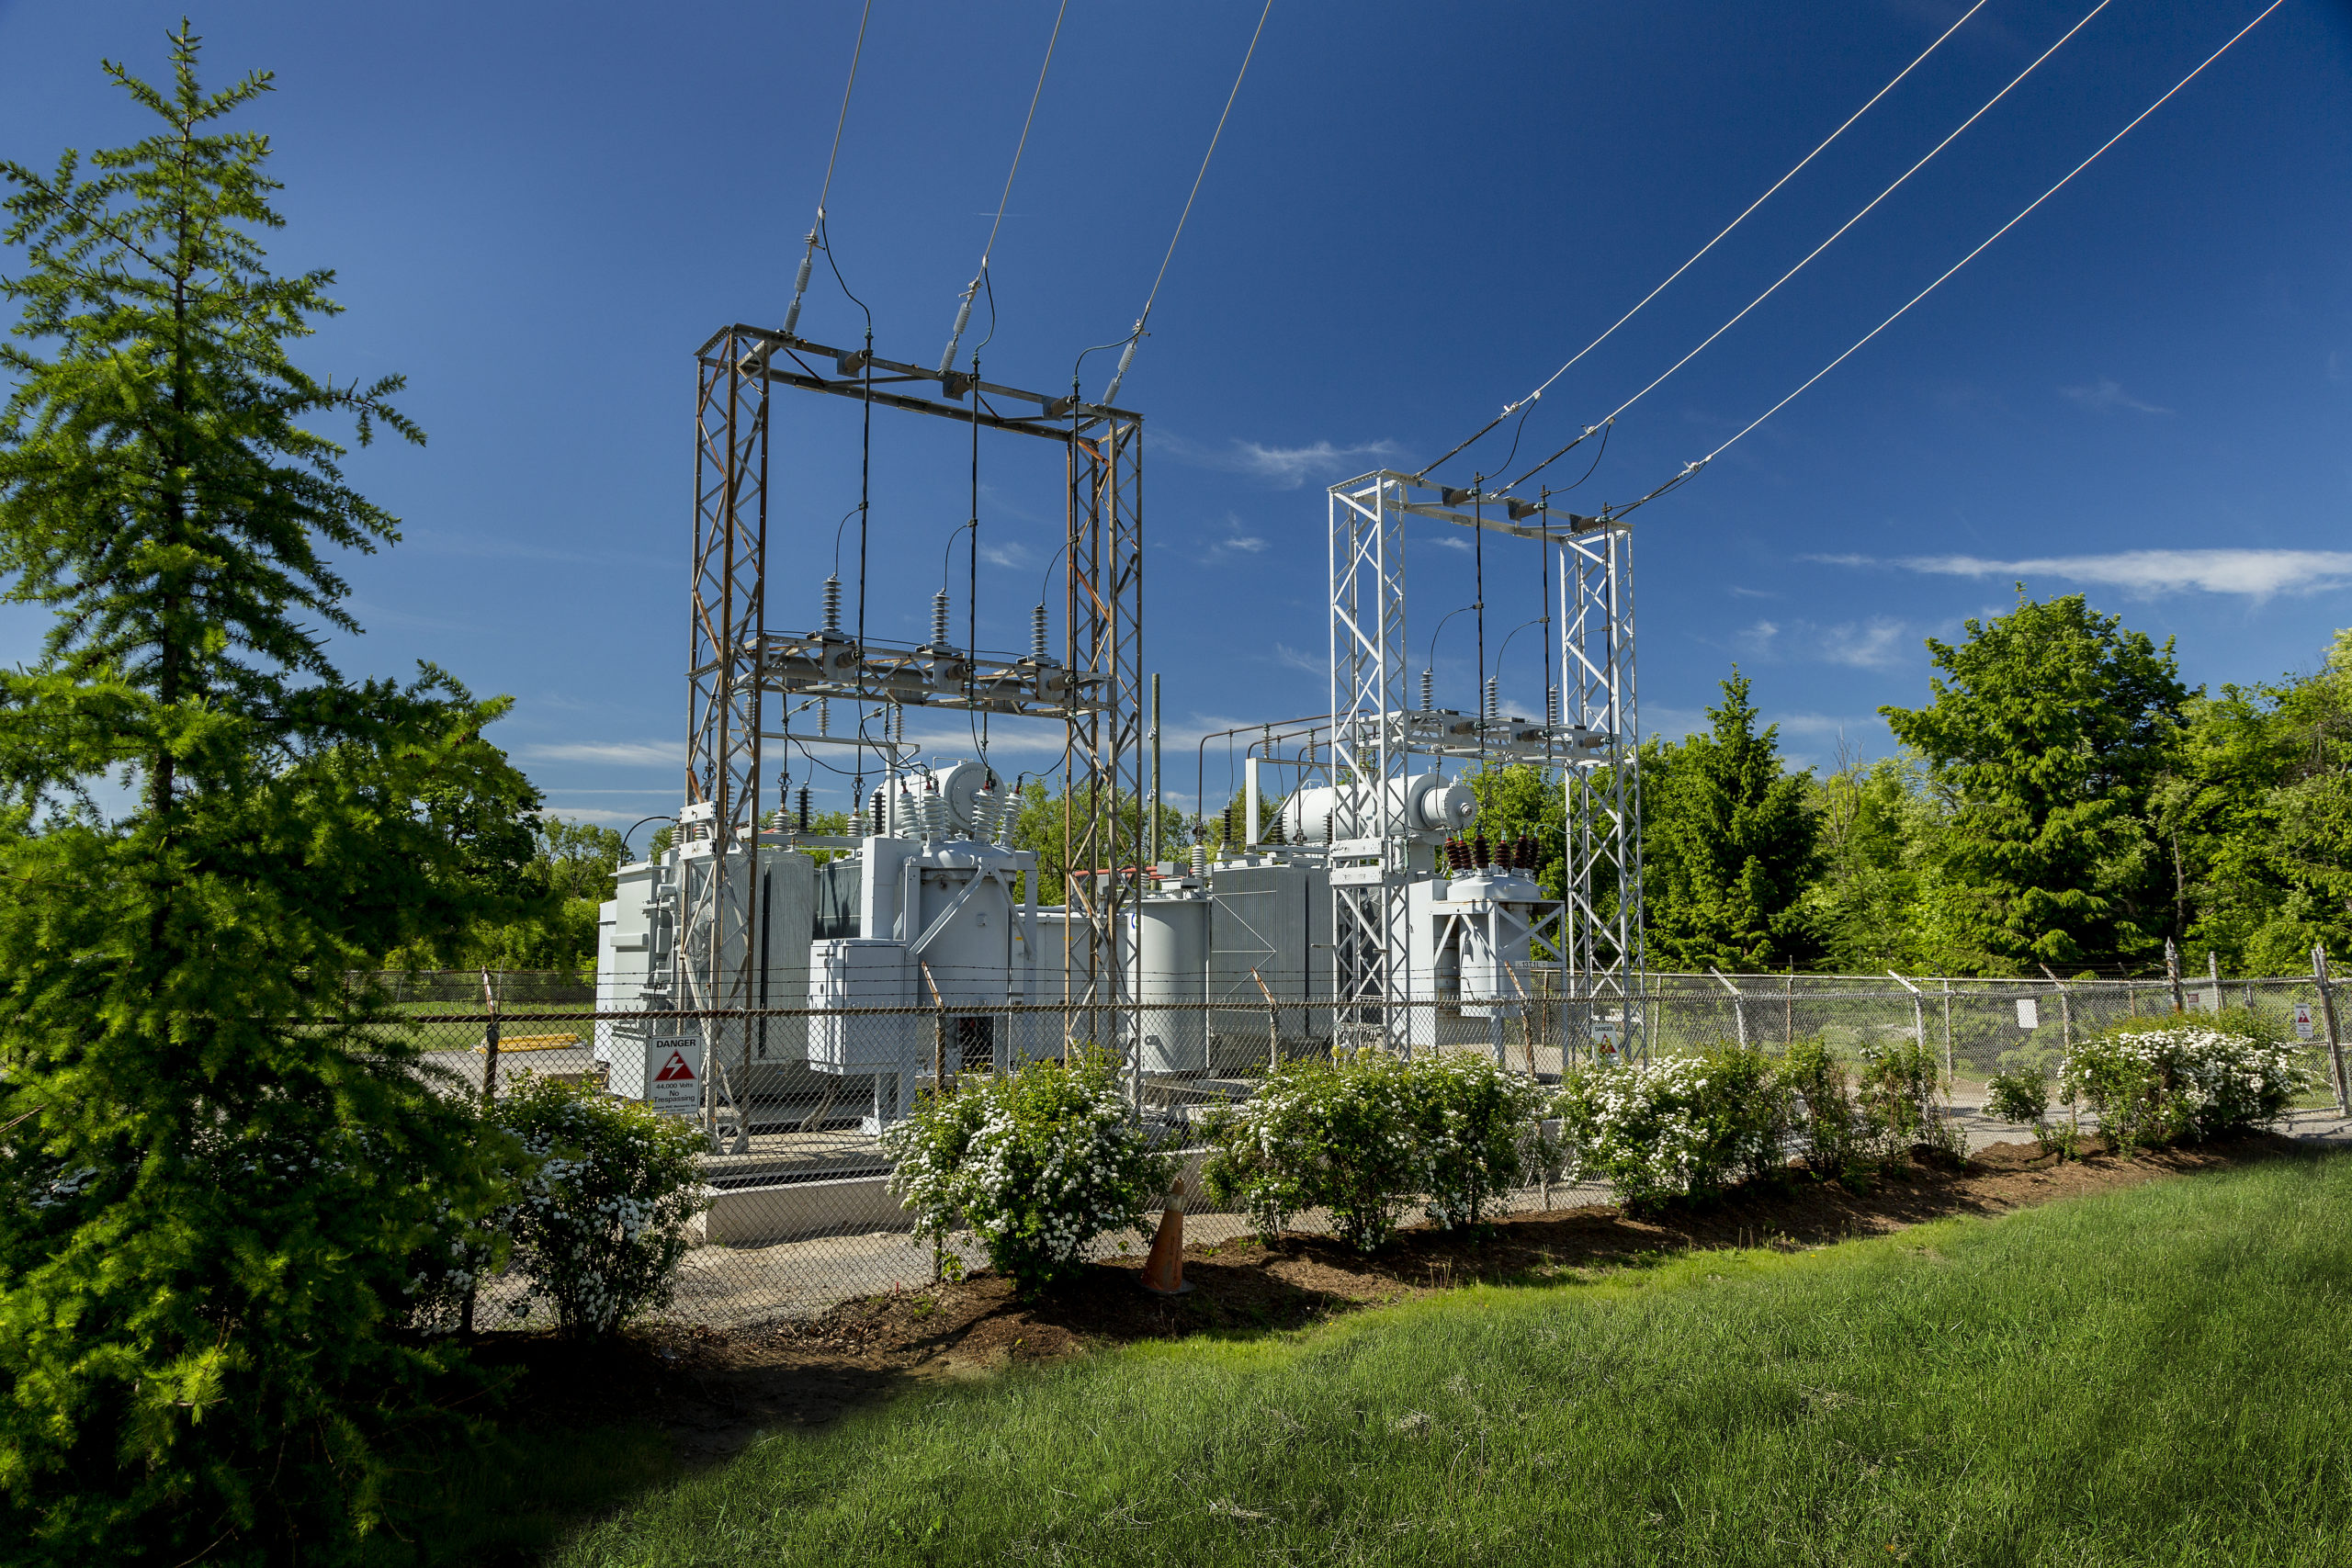 Oshawa Power provides safe, reliable and efficient electricity distribution services